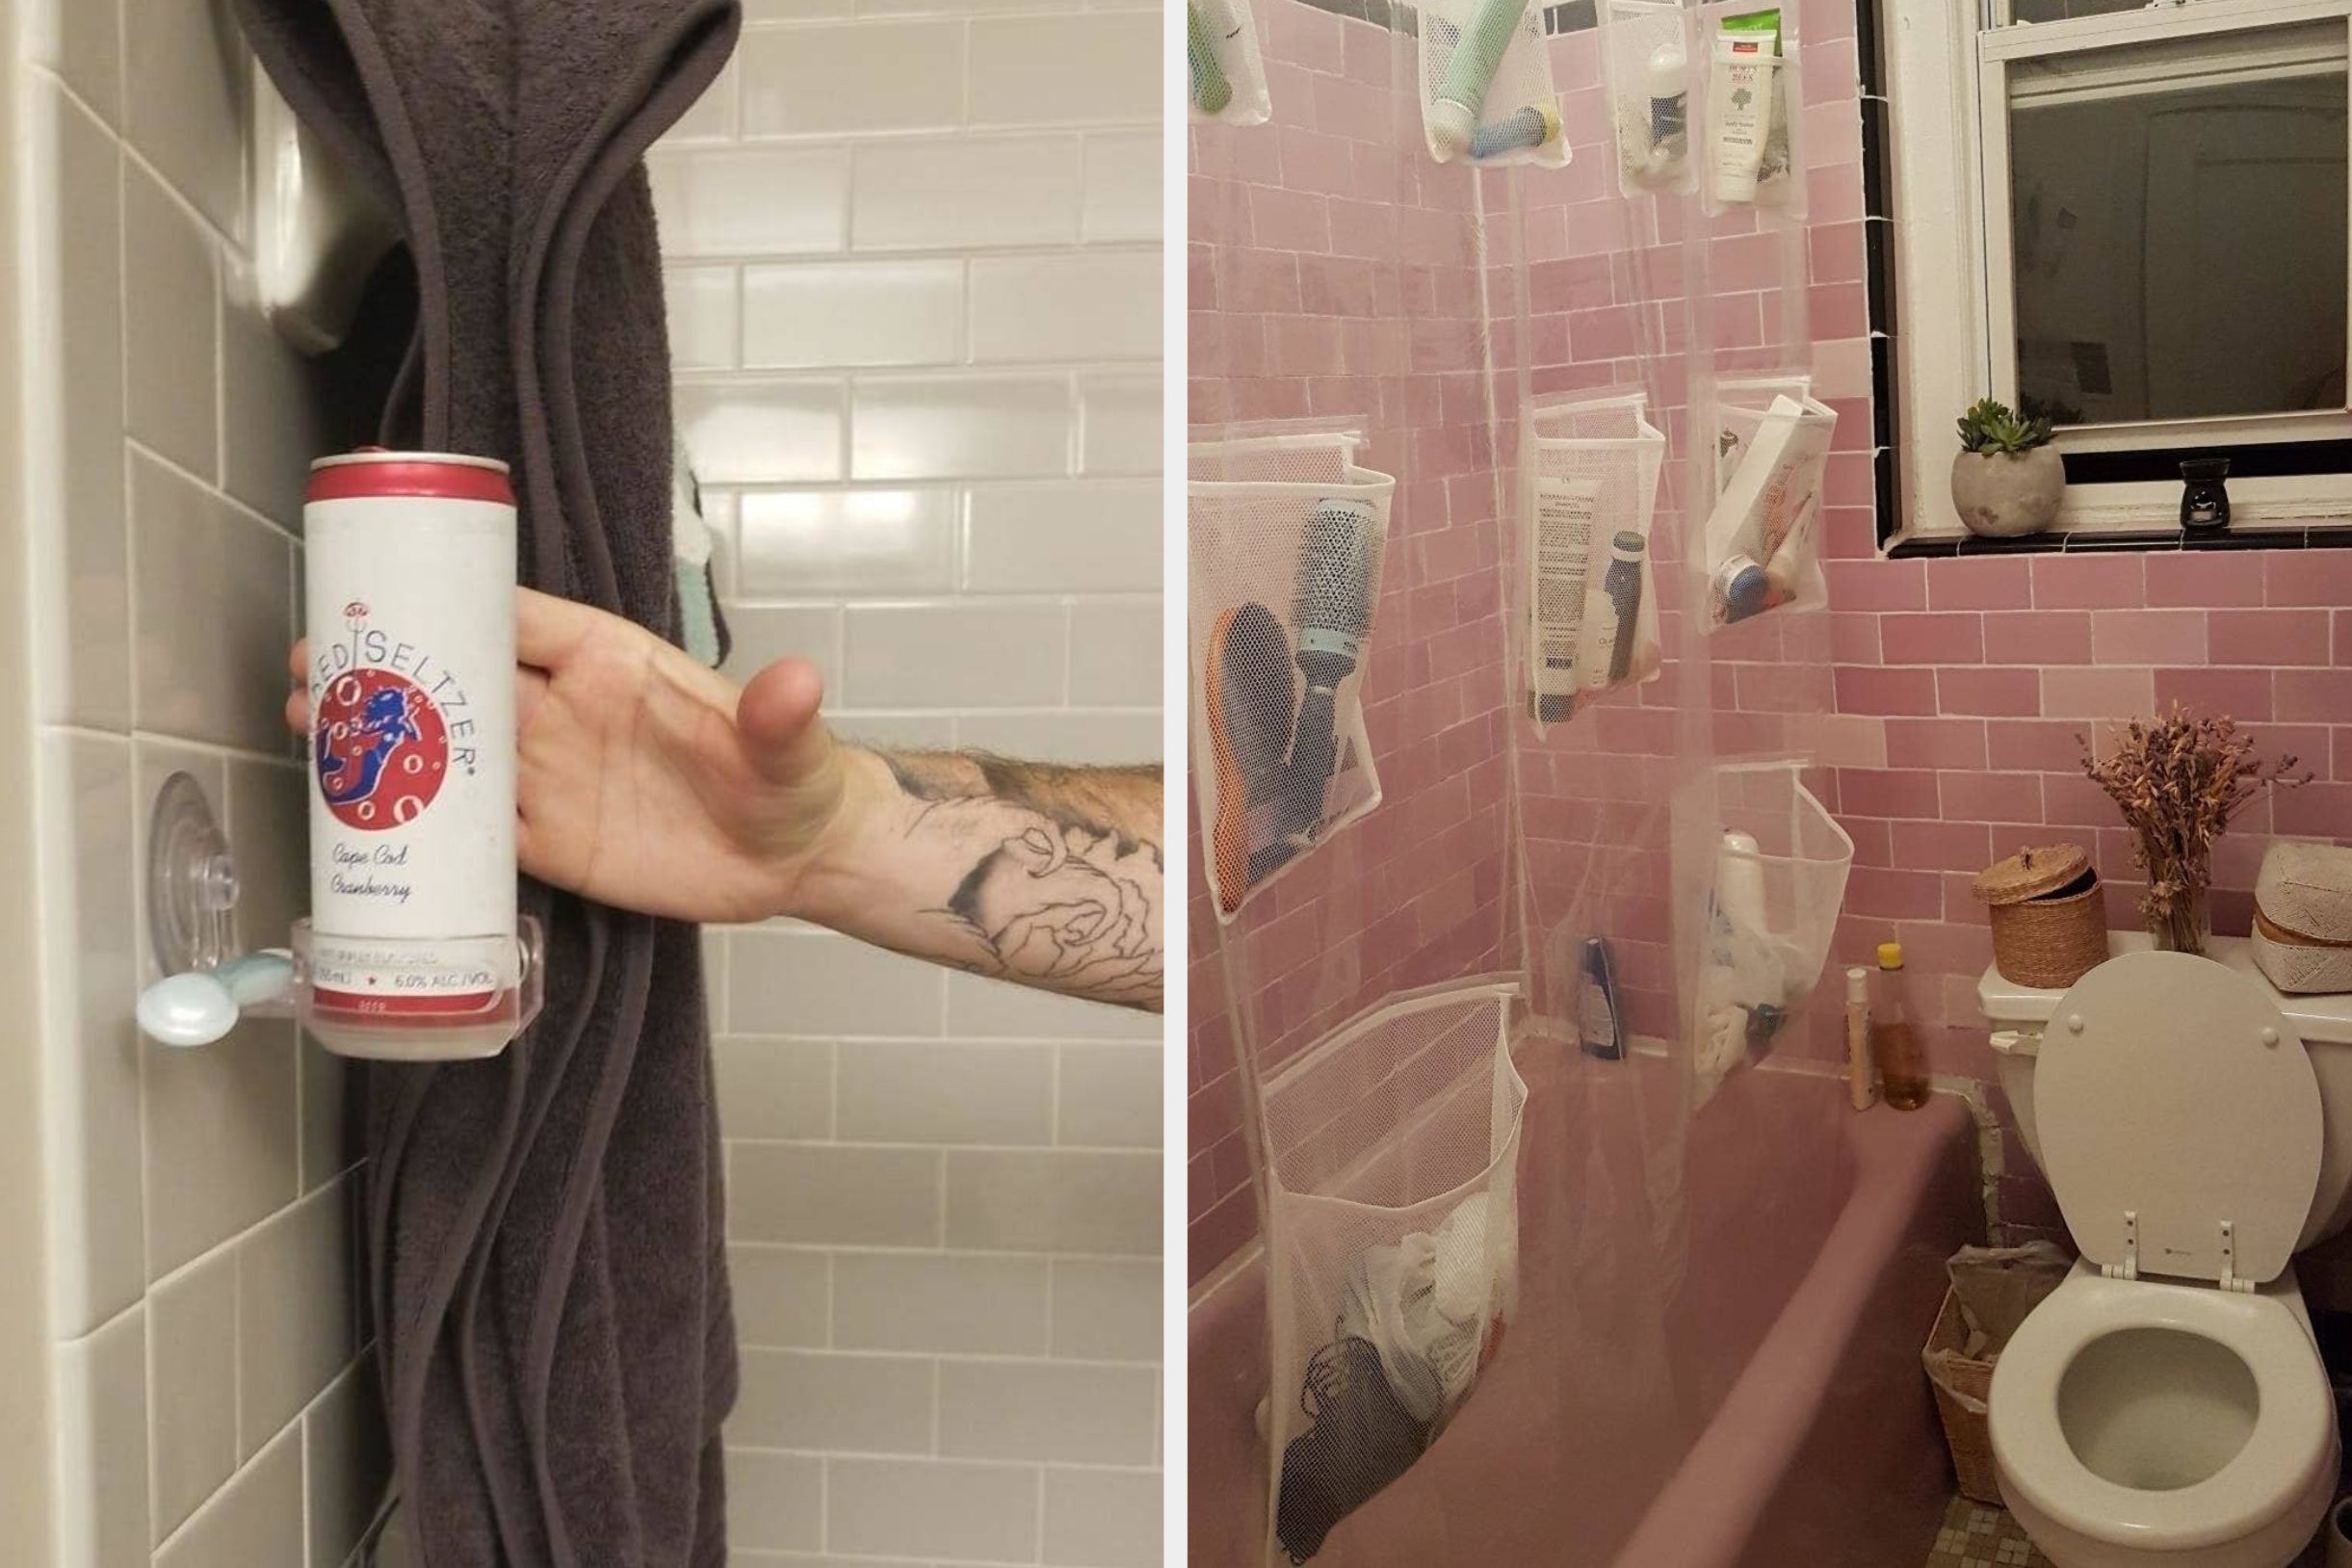 34 Products For A *Much* Better Bathroom